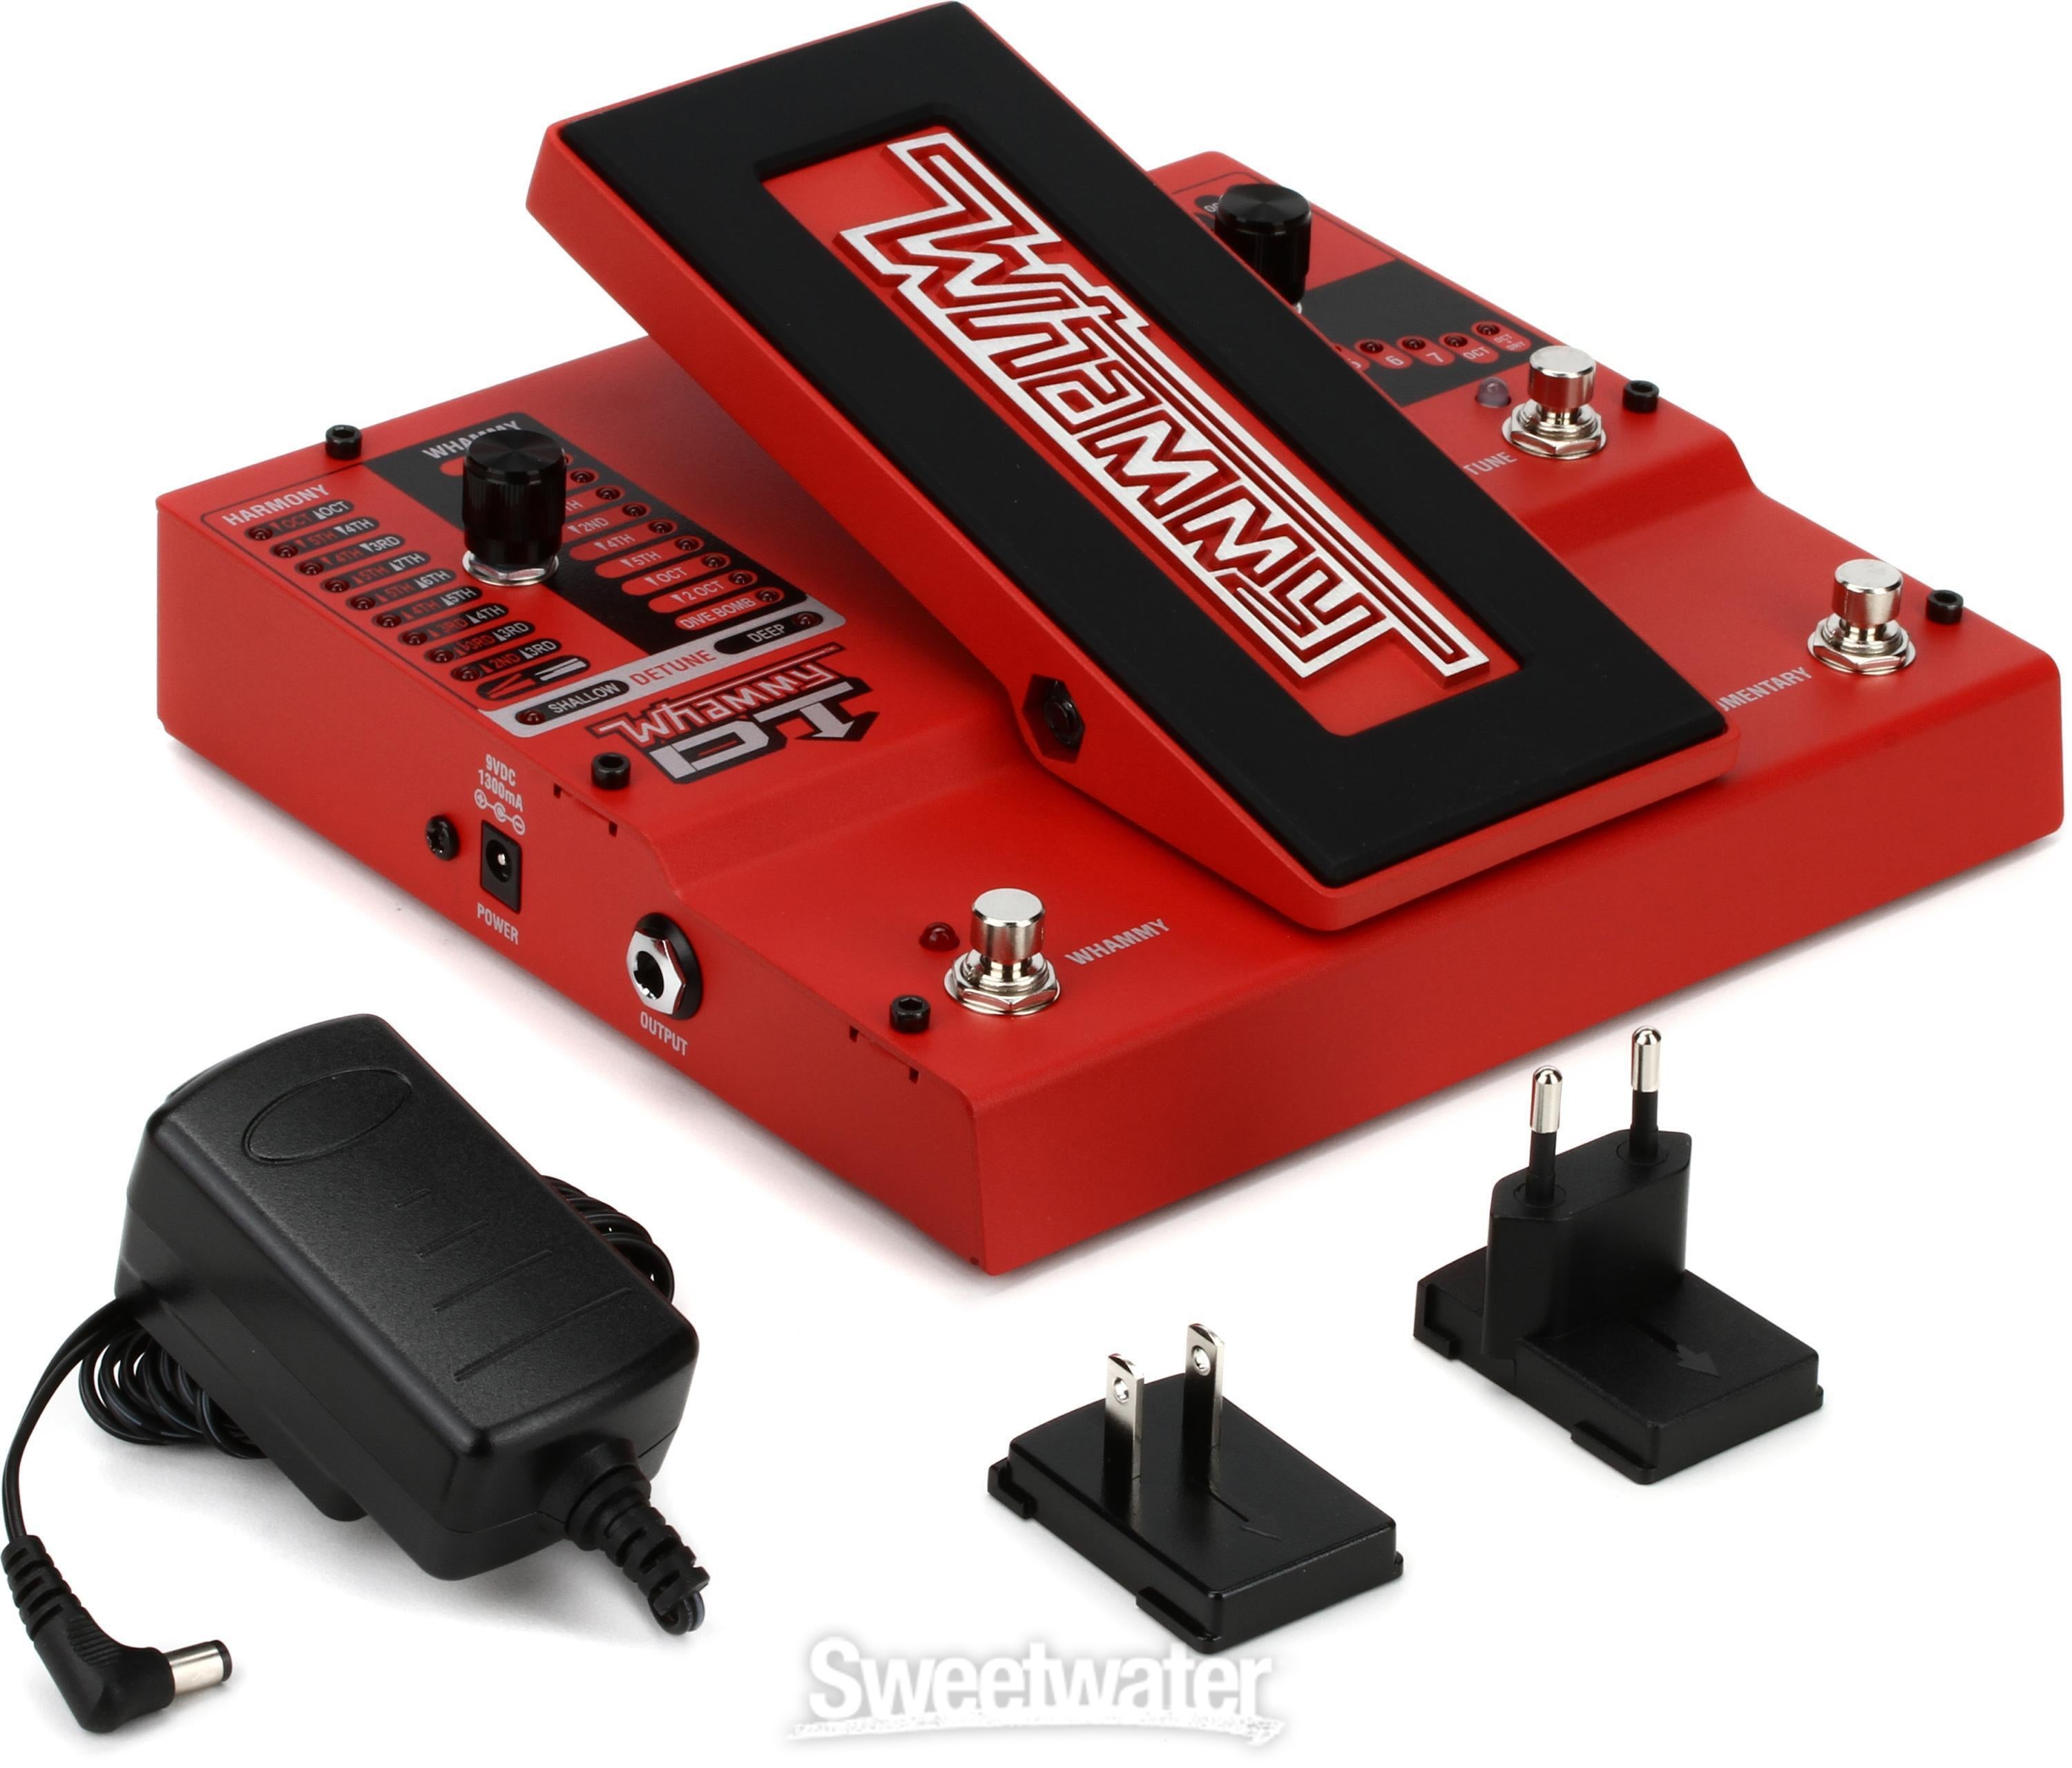 DigiTech Whammy DT Drop Tuning Pedal | Sweetwater